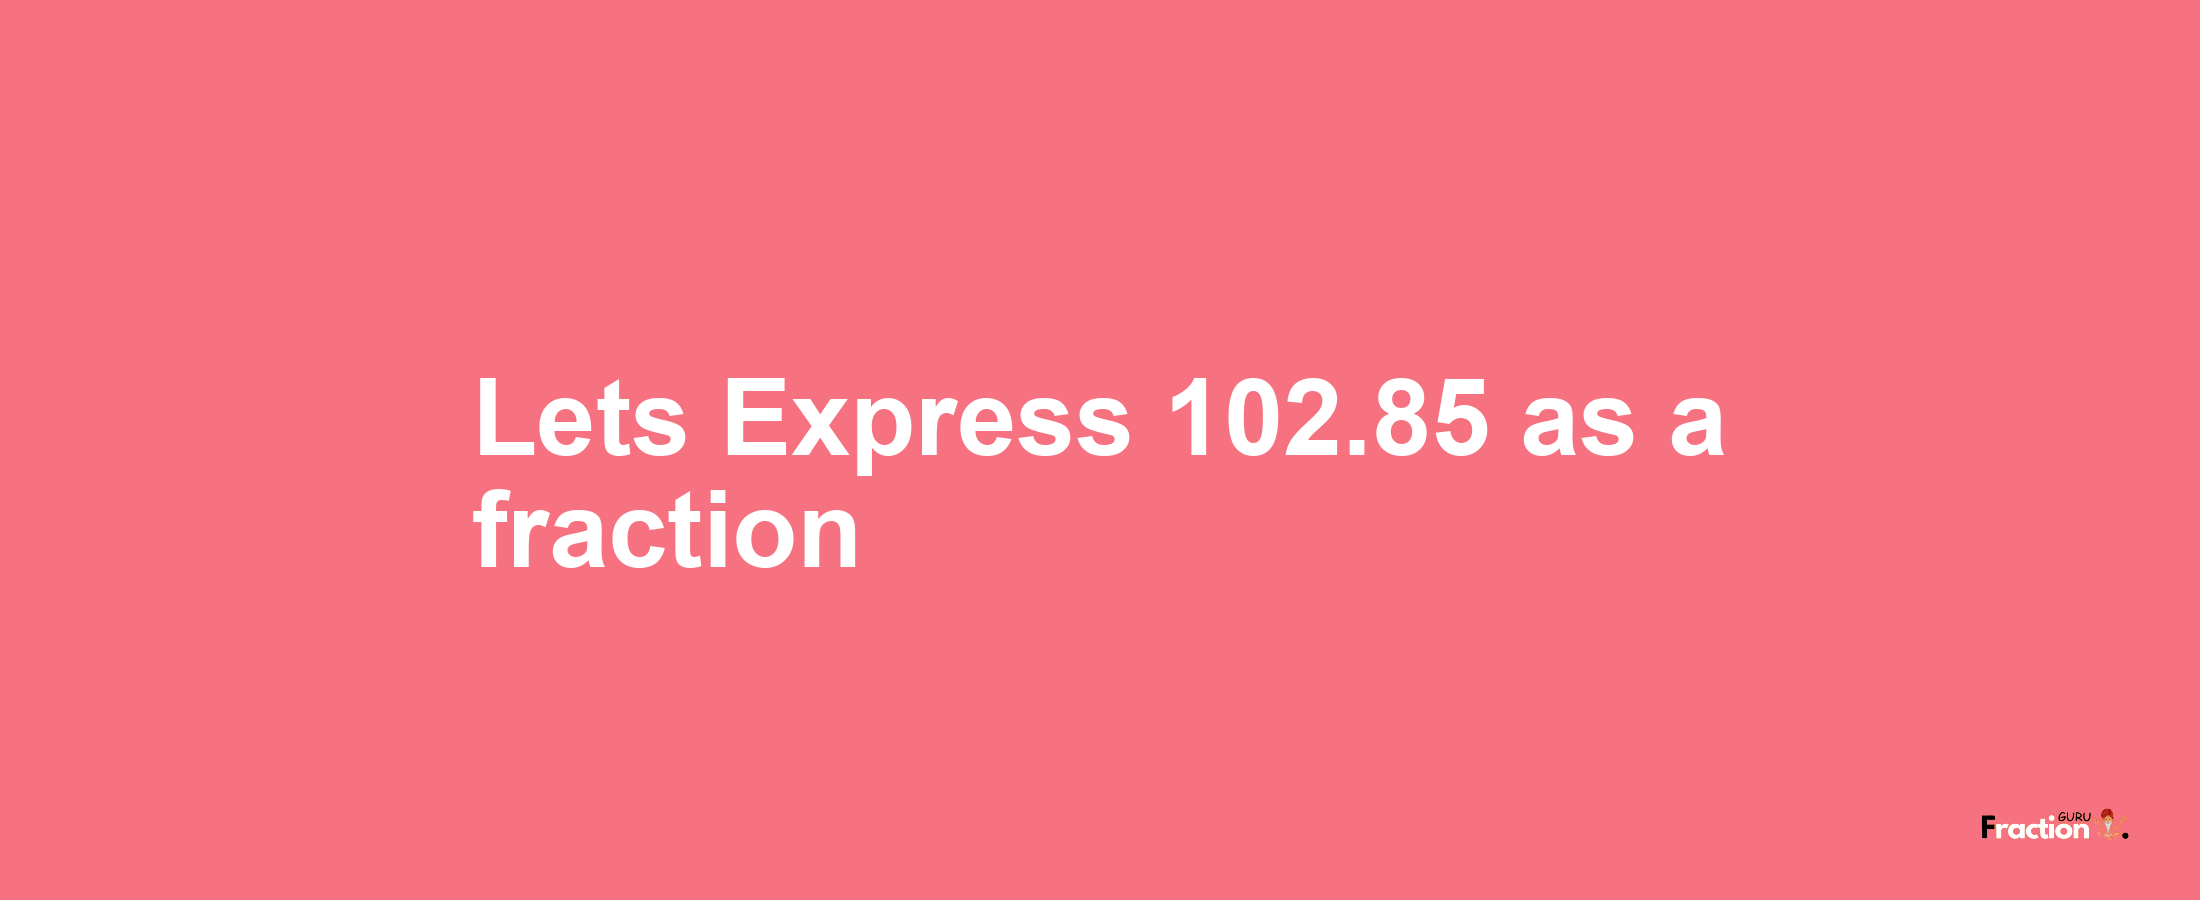 Lets Express 102.85 as afraction